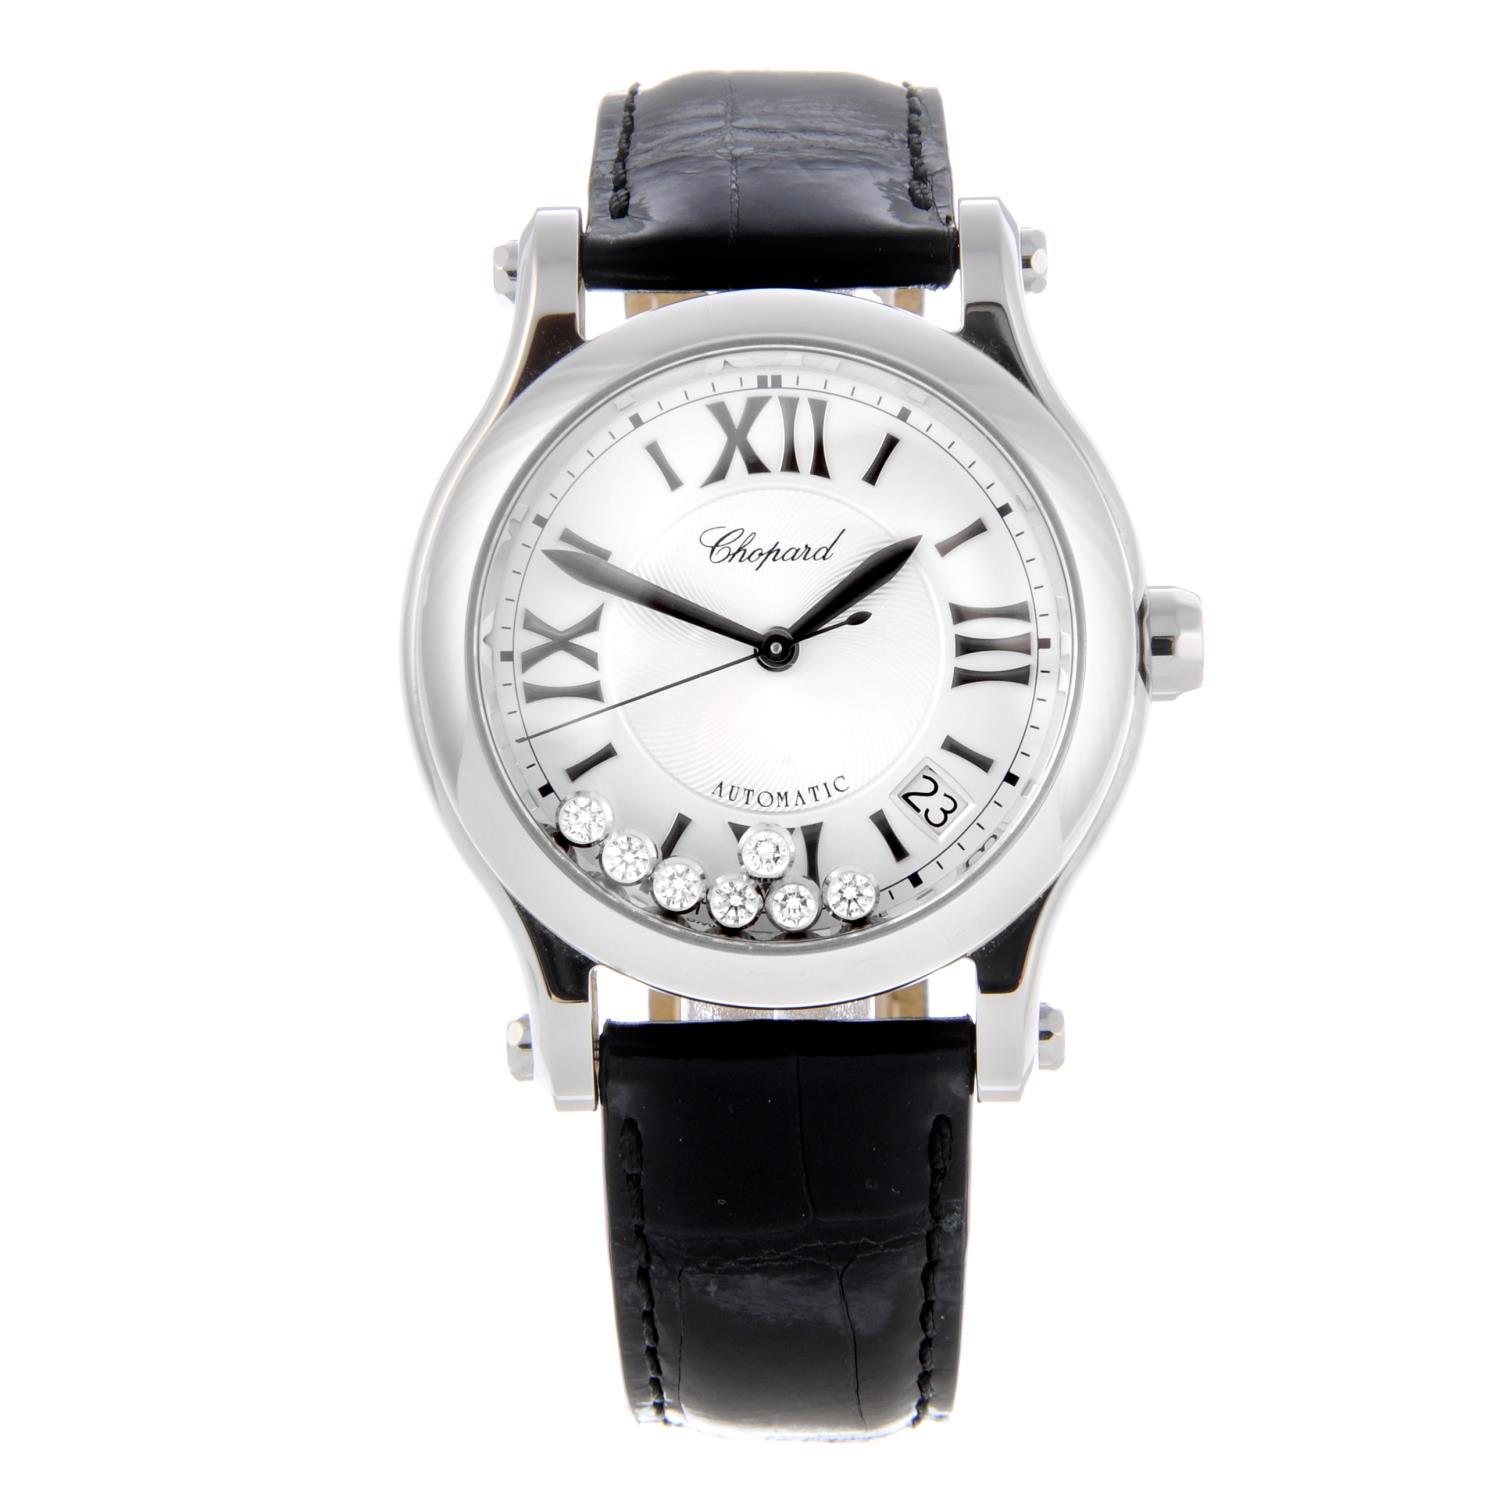 CHOPARD - a lady's Happy Sport wrist watch. Stainless steel case with exhibition case back.